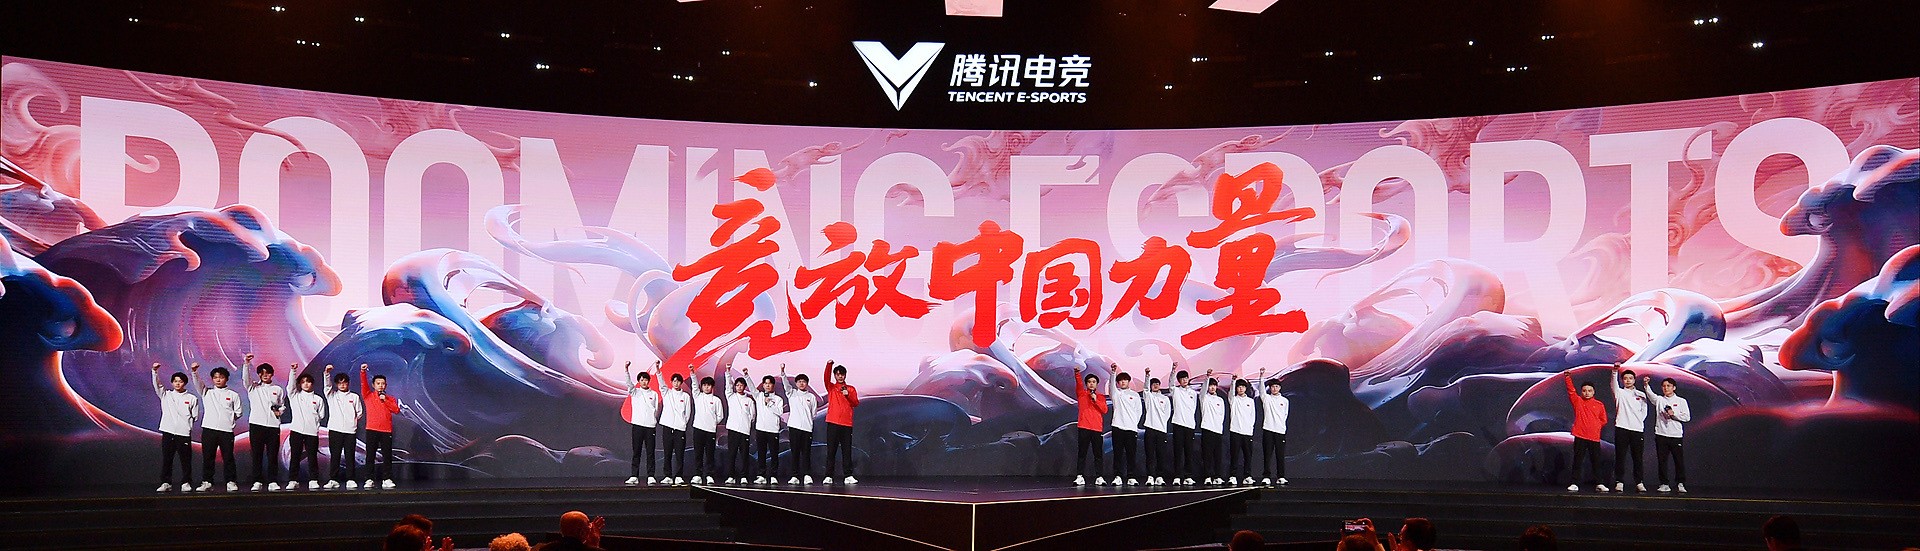 Hangzhou 2022 Asian Games lights up passion for Esports